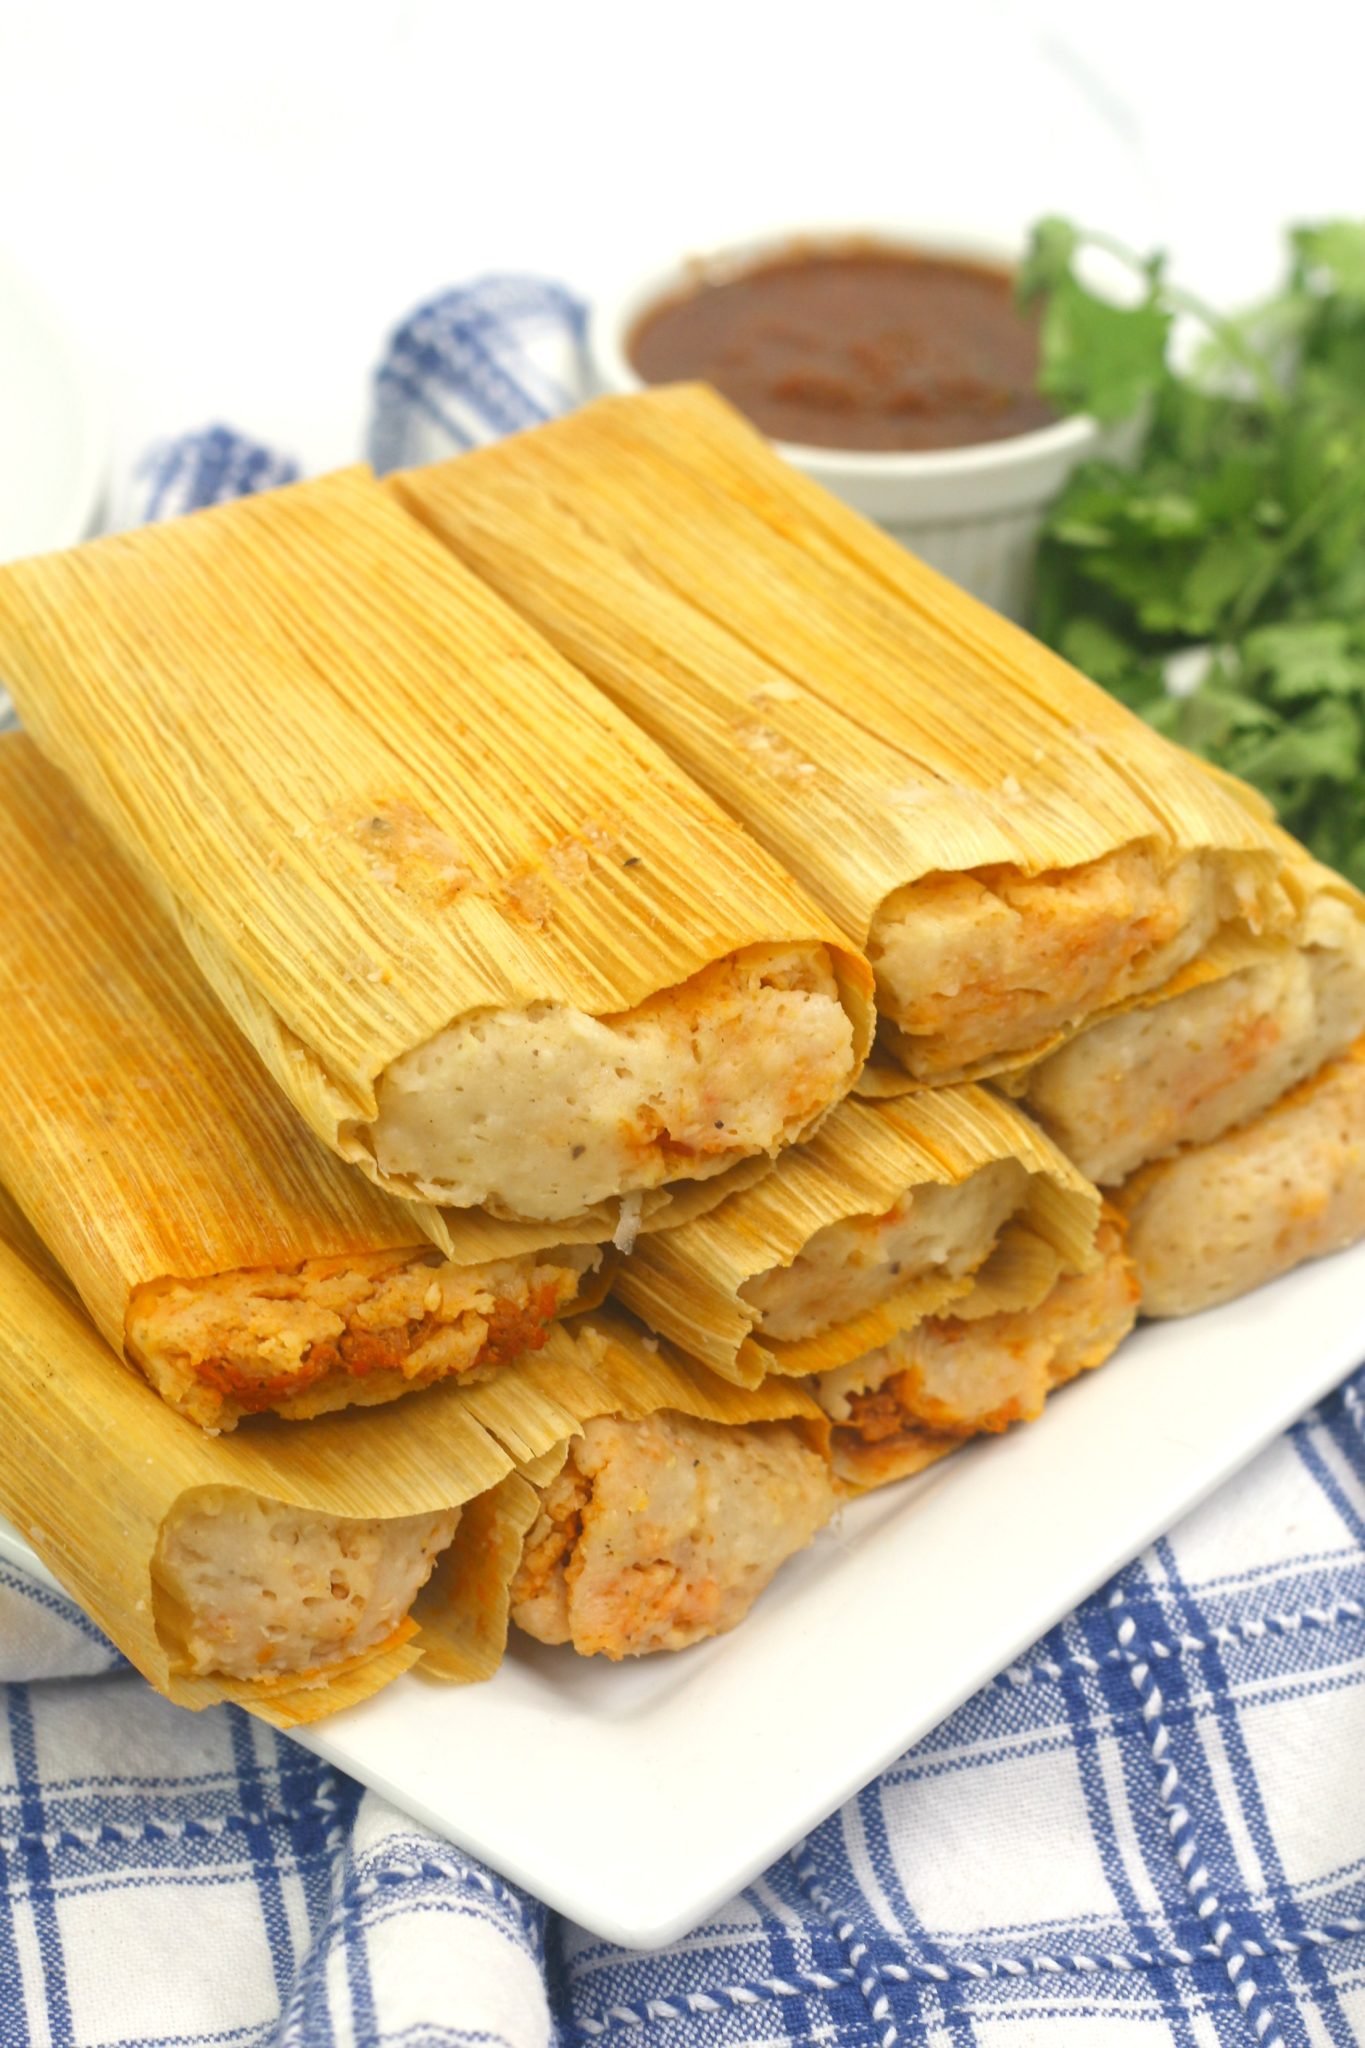 How To Make Mexican Pork Tamales - 4 Sons 'R' Us